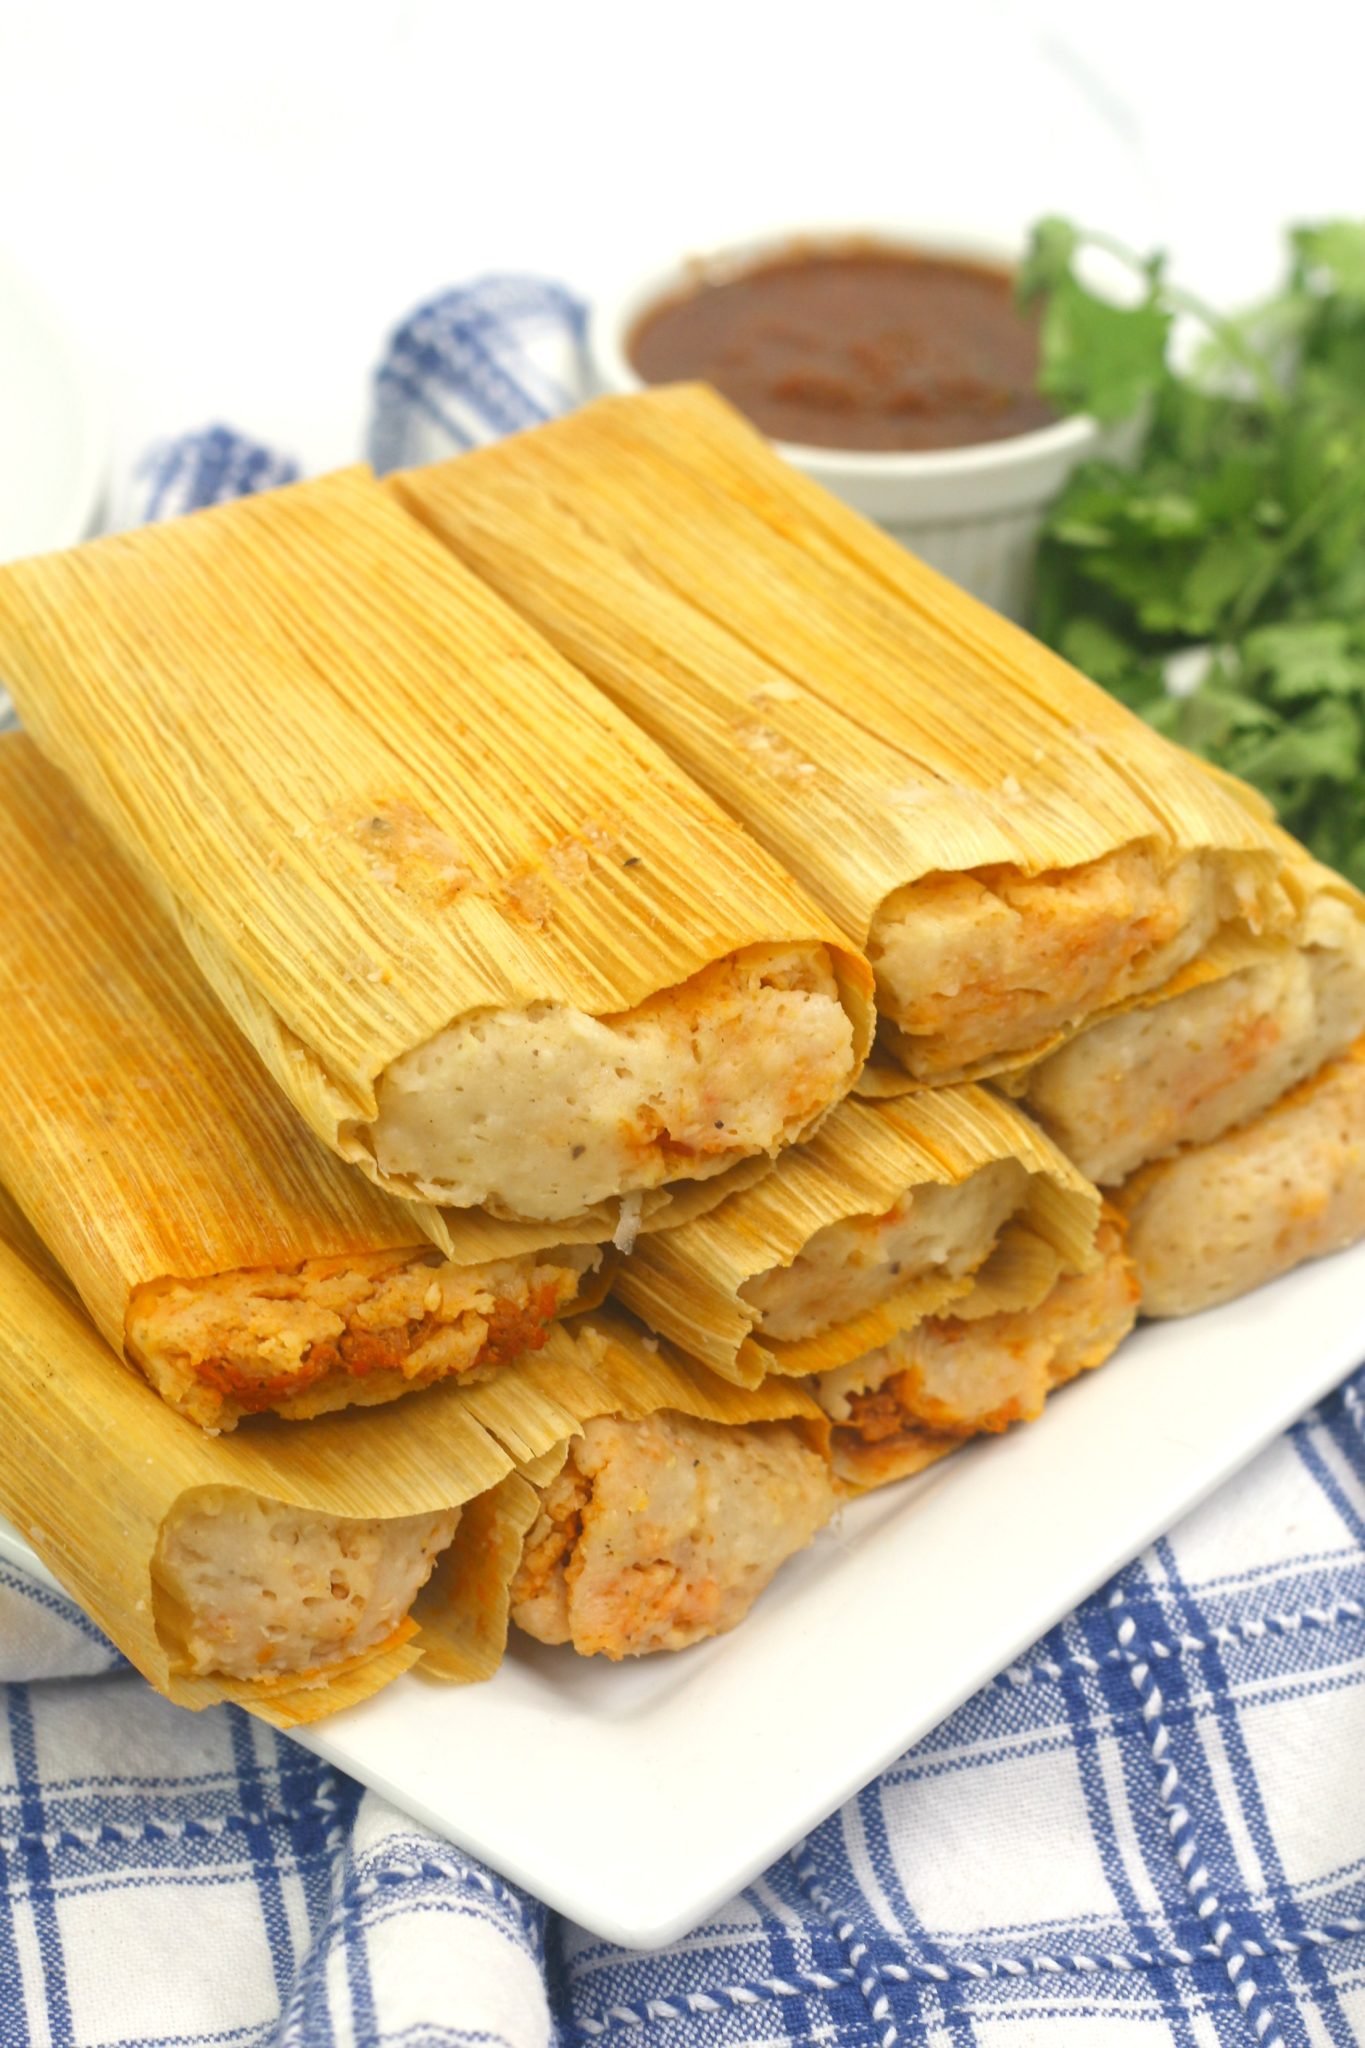 How To Make Mexican Pork Tamales - 4 Sons 'R' Us